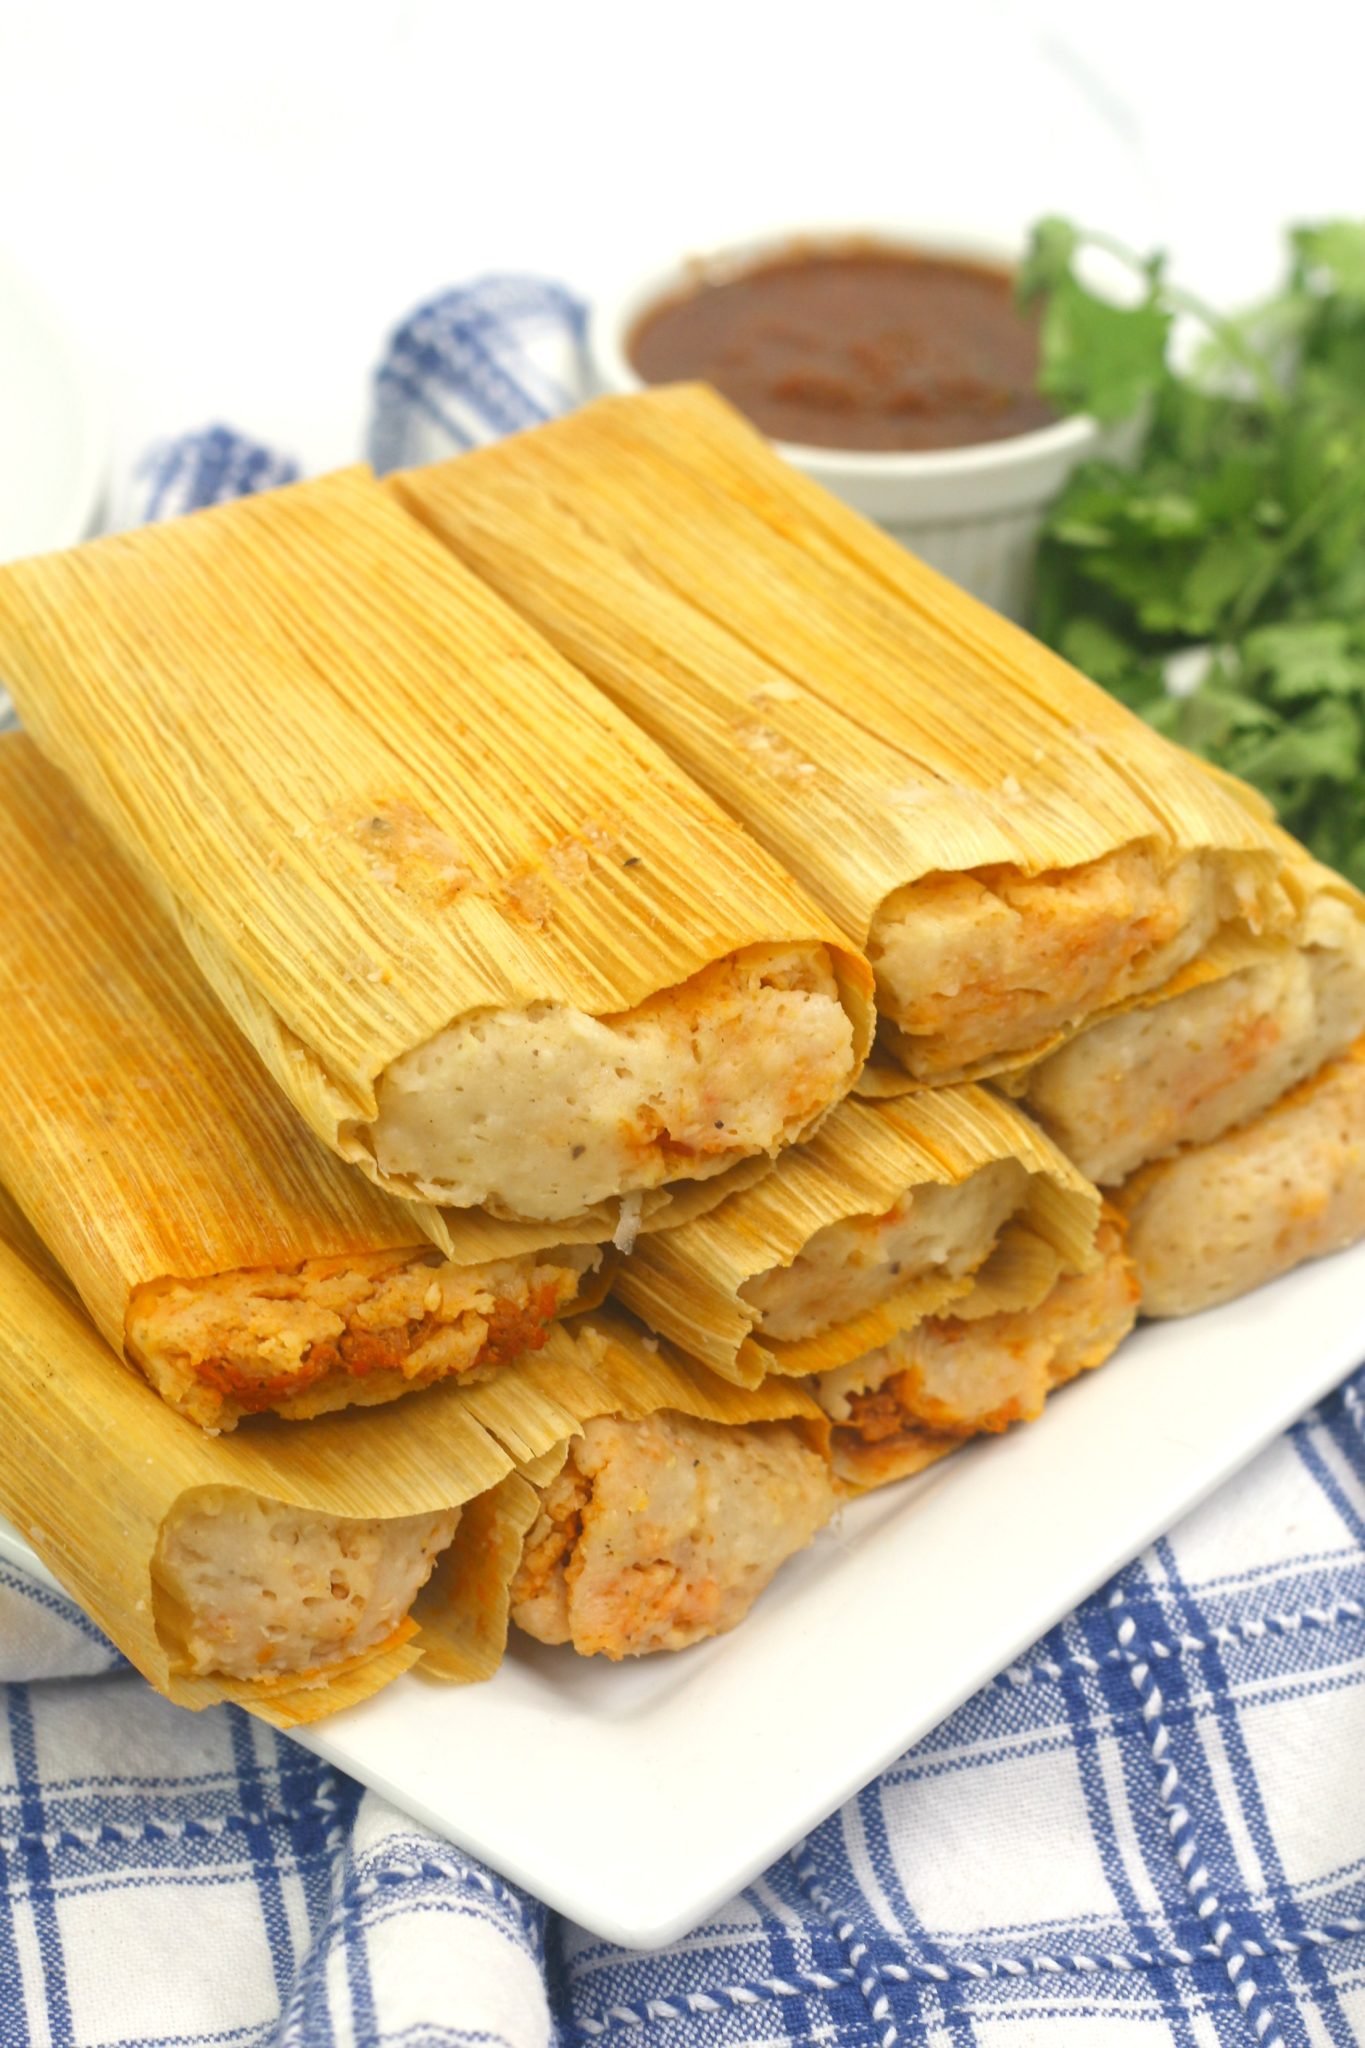 How To Make Mexican Pork Tamales - 4 Sons 'R' Us